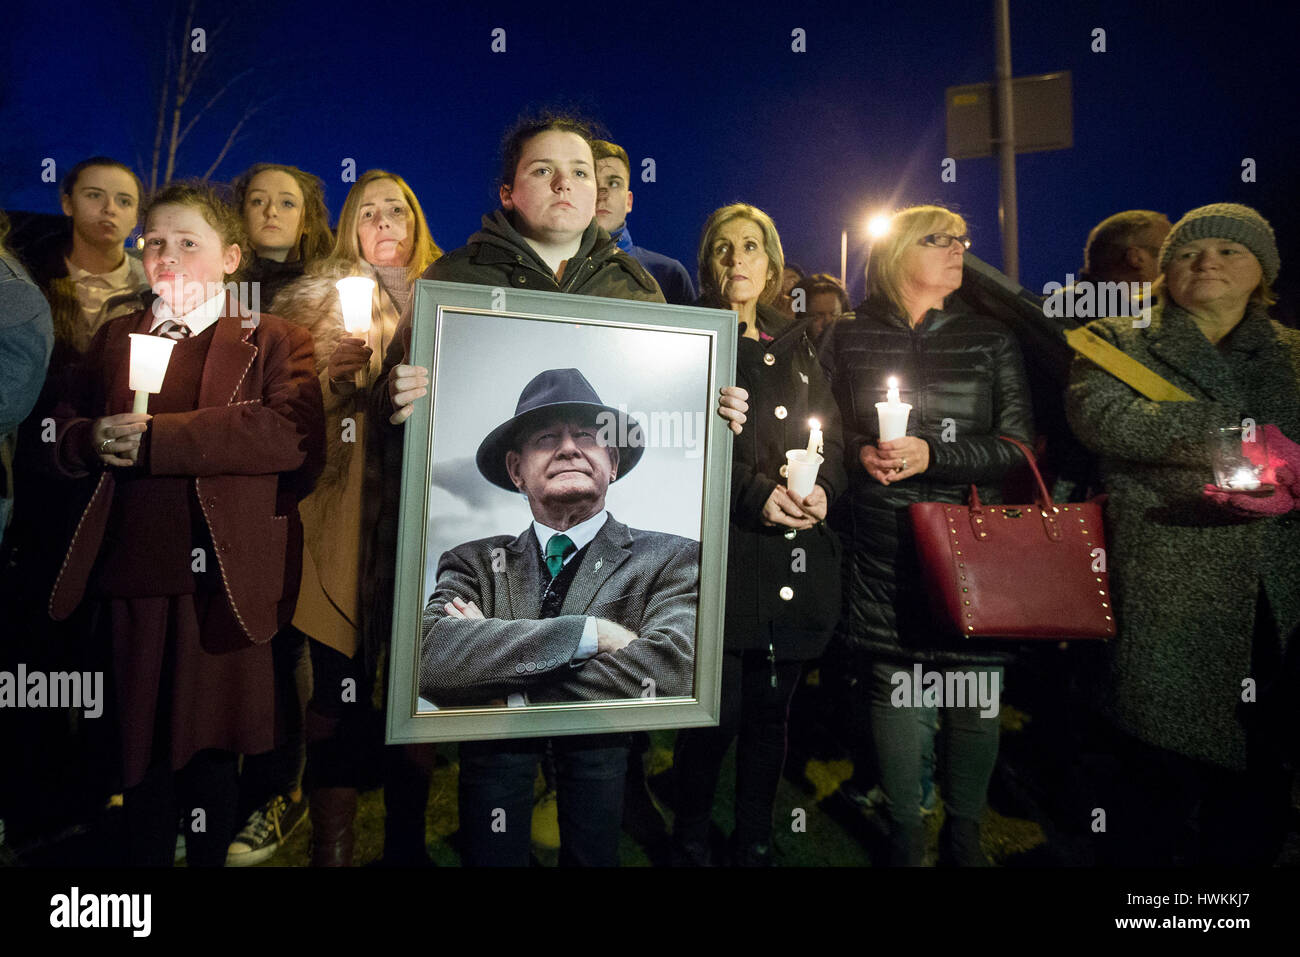 Roise Morgan holds an image of Martin McGuinness during a vigil at the former site of the Andersontown Police Station in Belfast, after Northern Ireland's former deputy first minister and ex-IRA commander Martin McGuinness died aged 66. Stock Photo